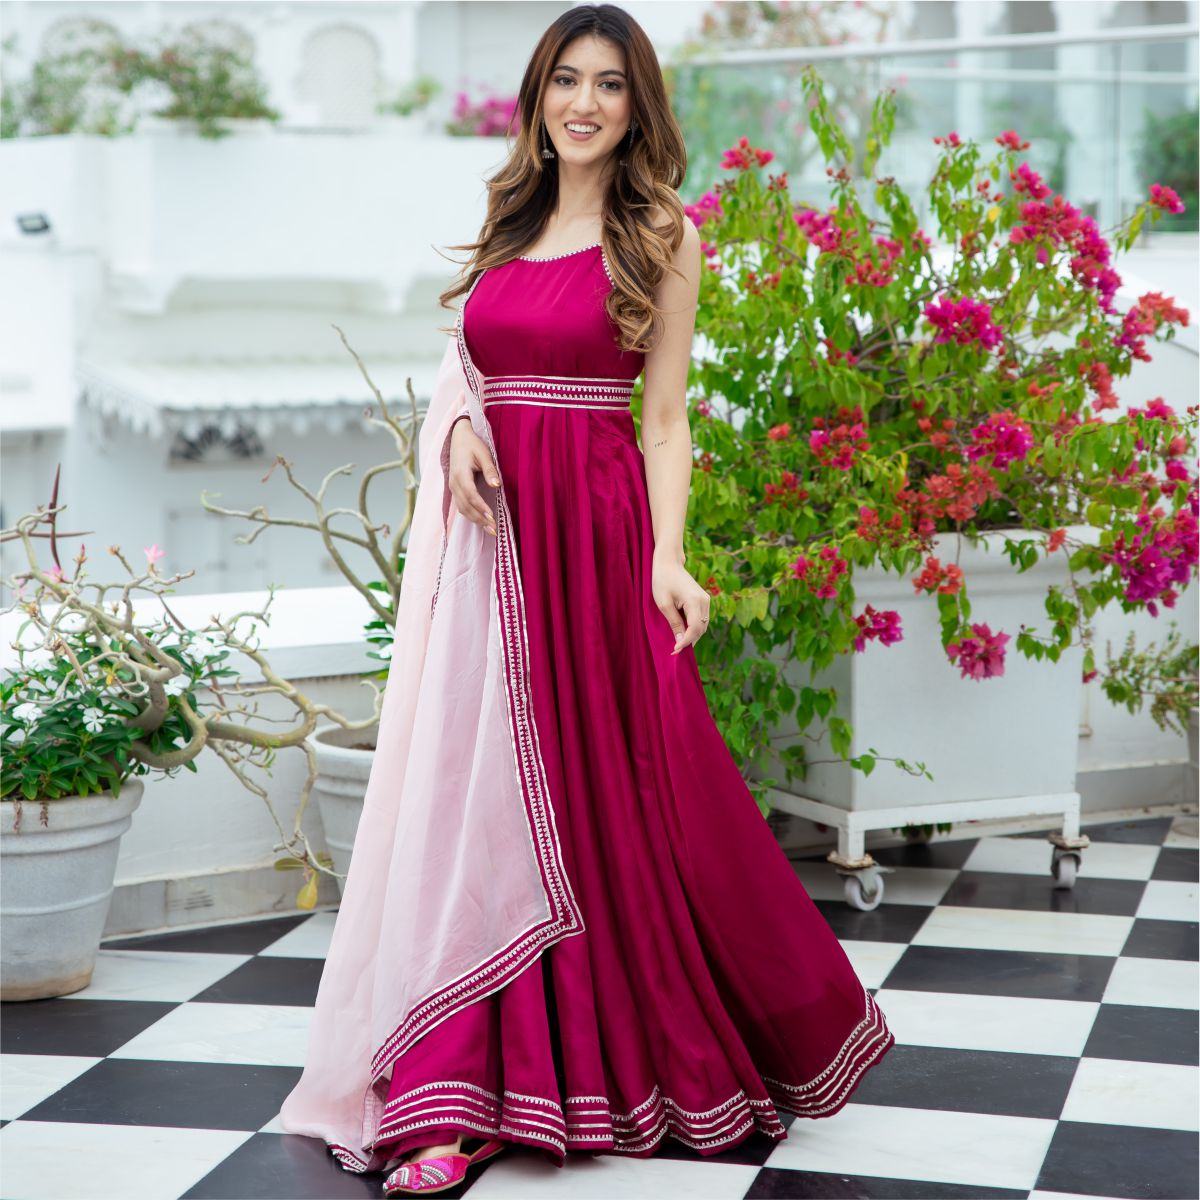 Bulk Buy India Wholesale Elegant Long Silk Gown With Front Design.  Embroidered Patch Work Design In Front For Classy Look. $390 from Kalika  Fasionista | Globalsources.com